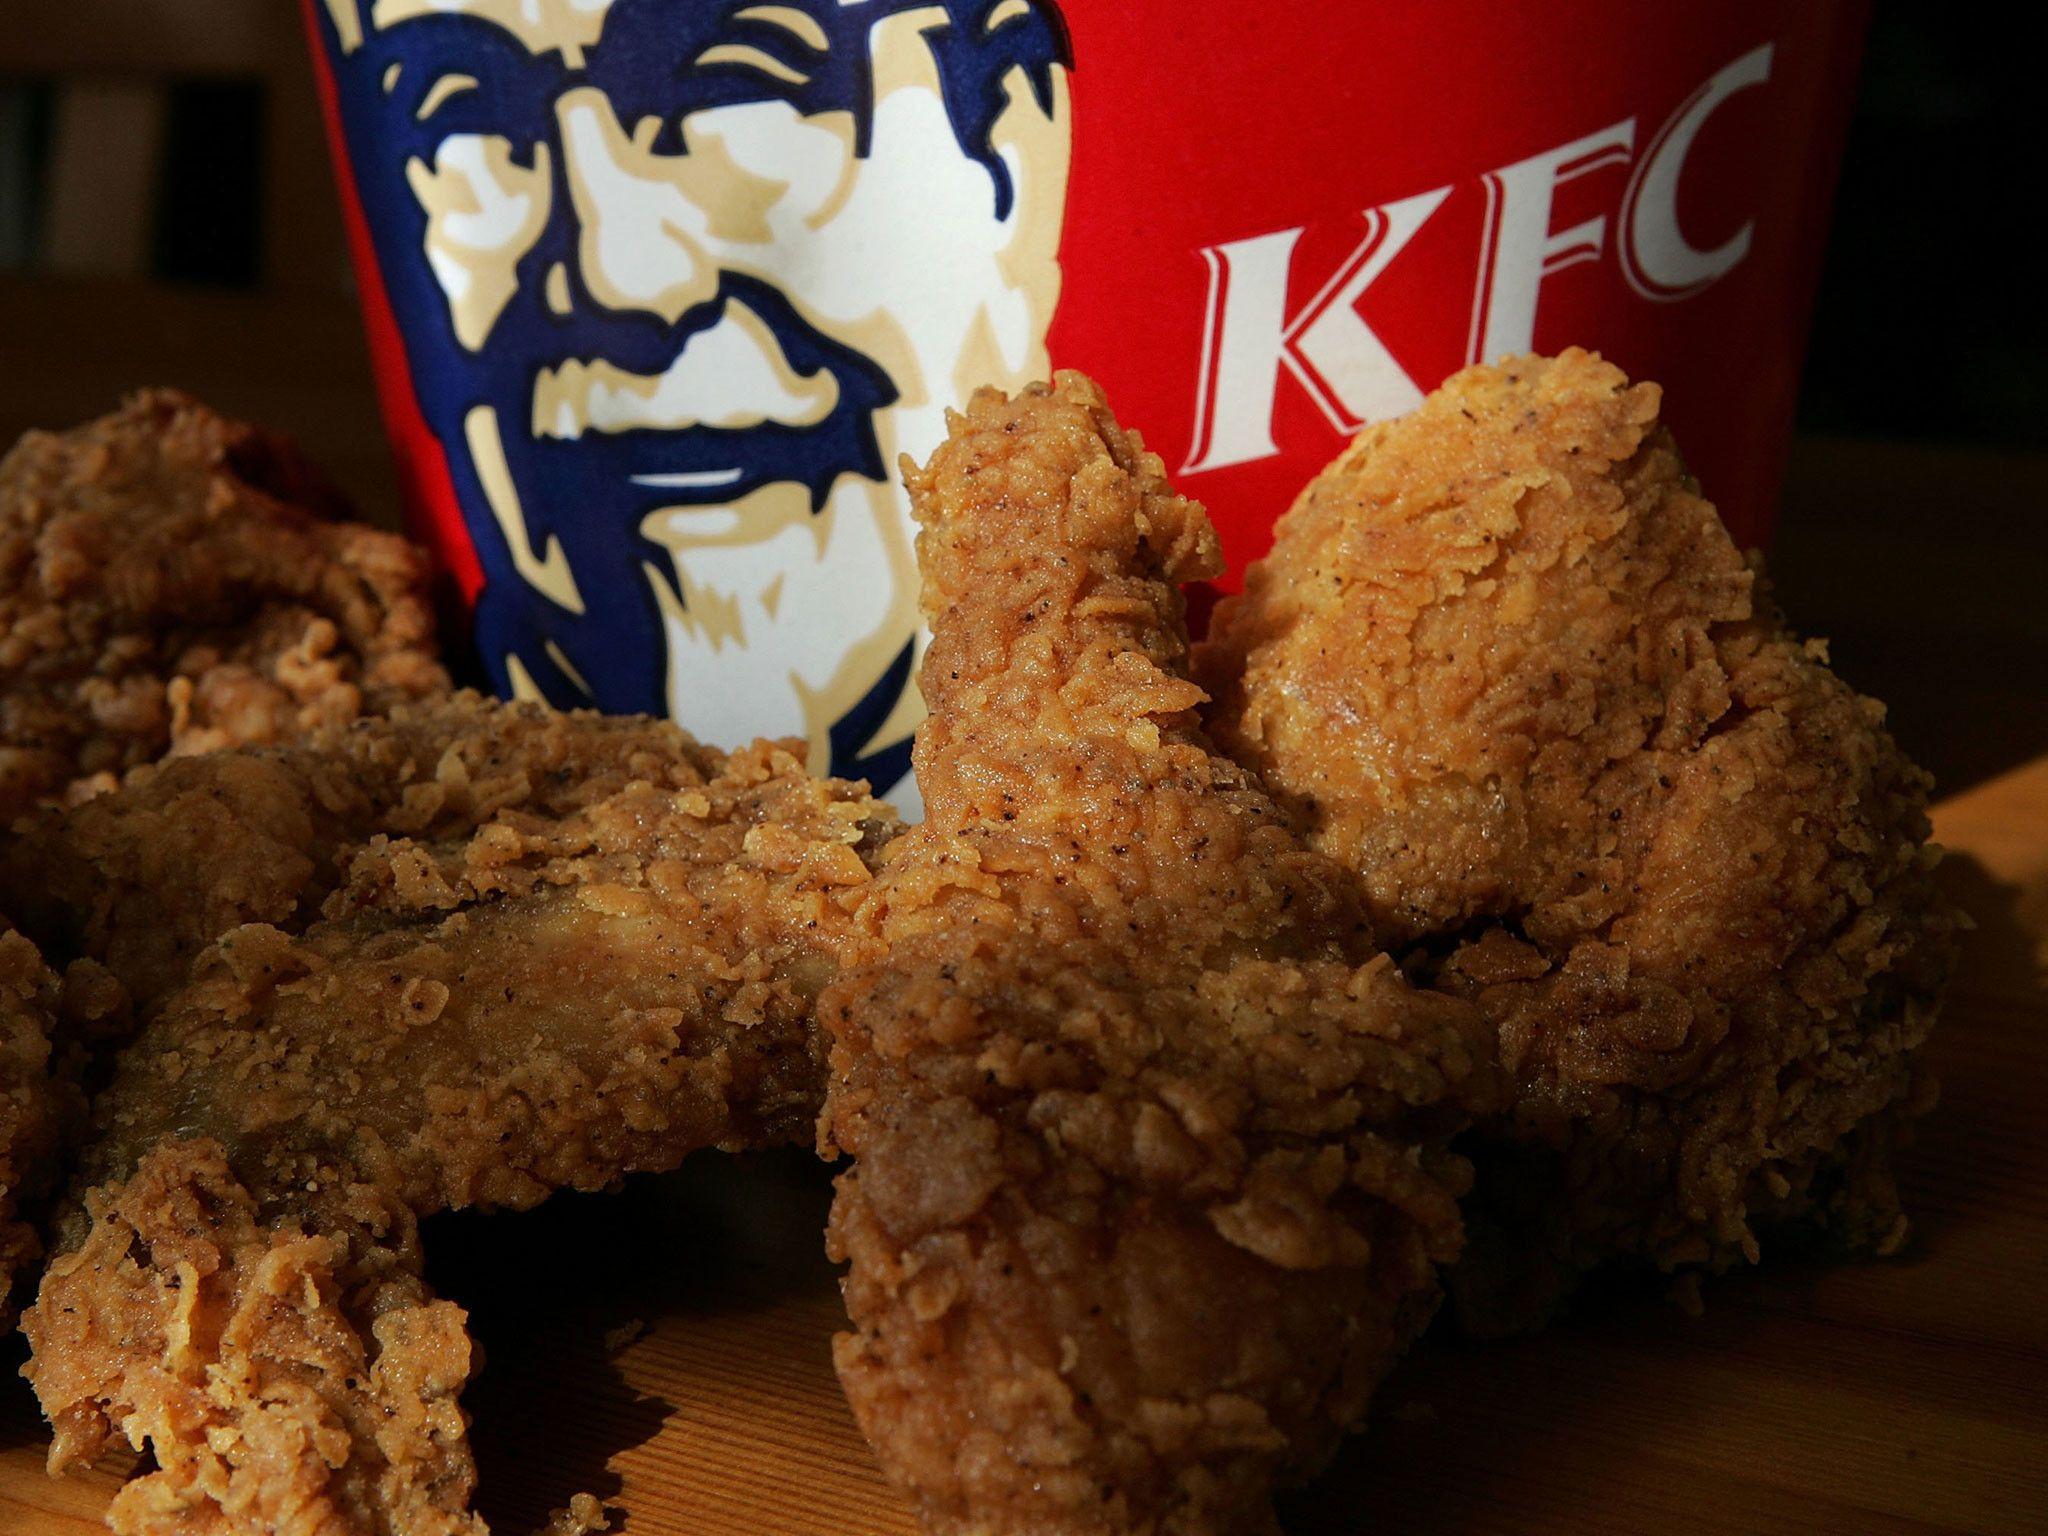 Kfc Wallpapers 58 images